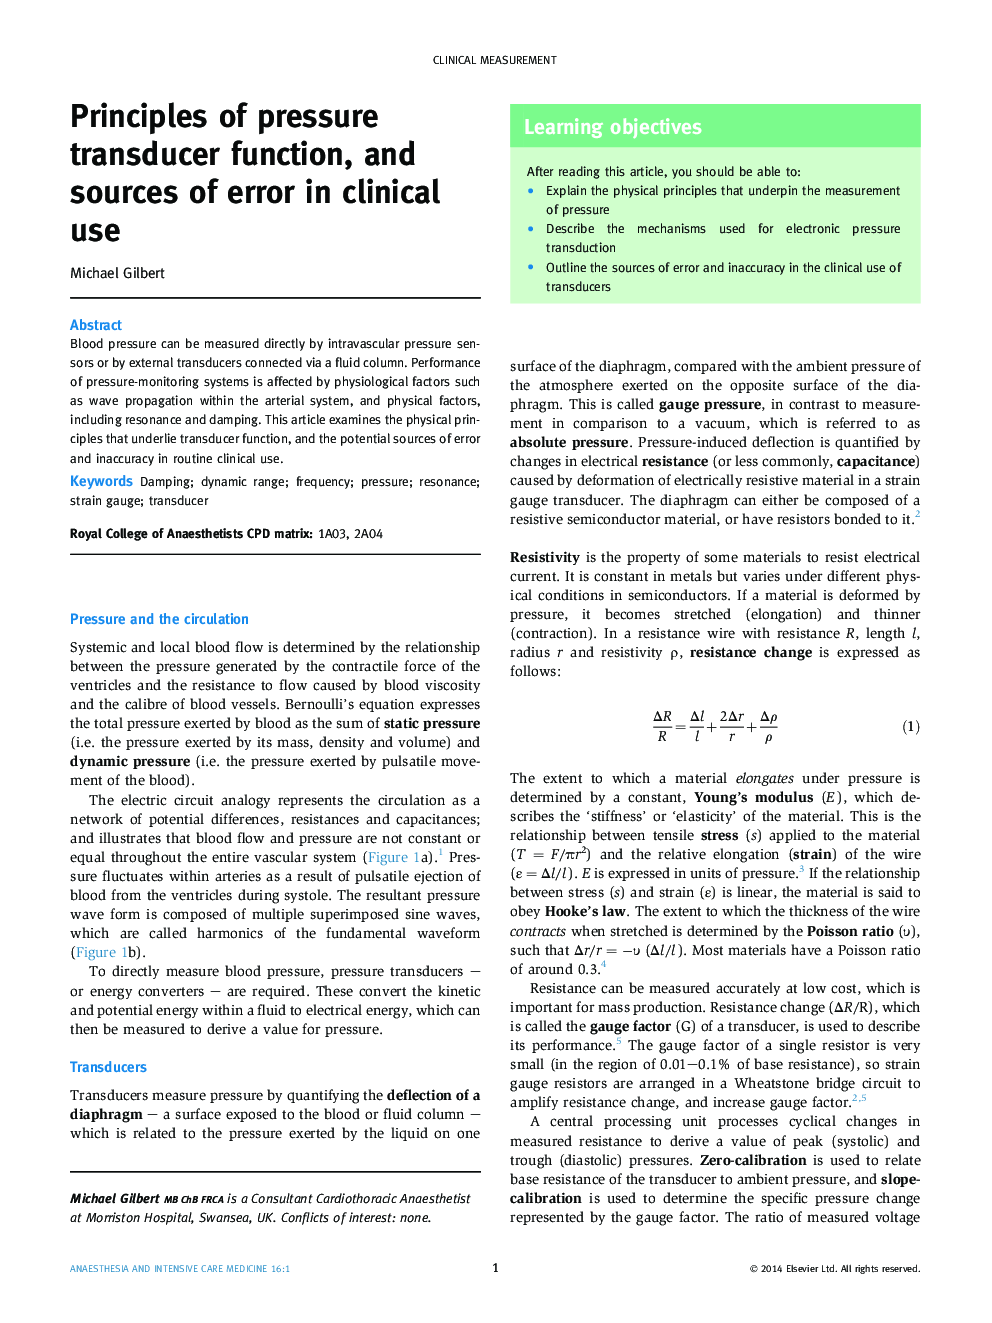 Principles of pressure transducer function, and sources of error in clinical use